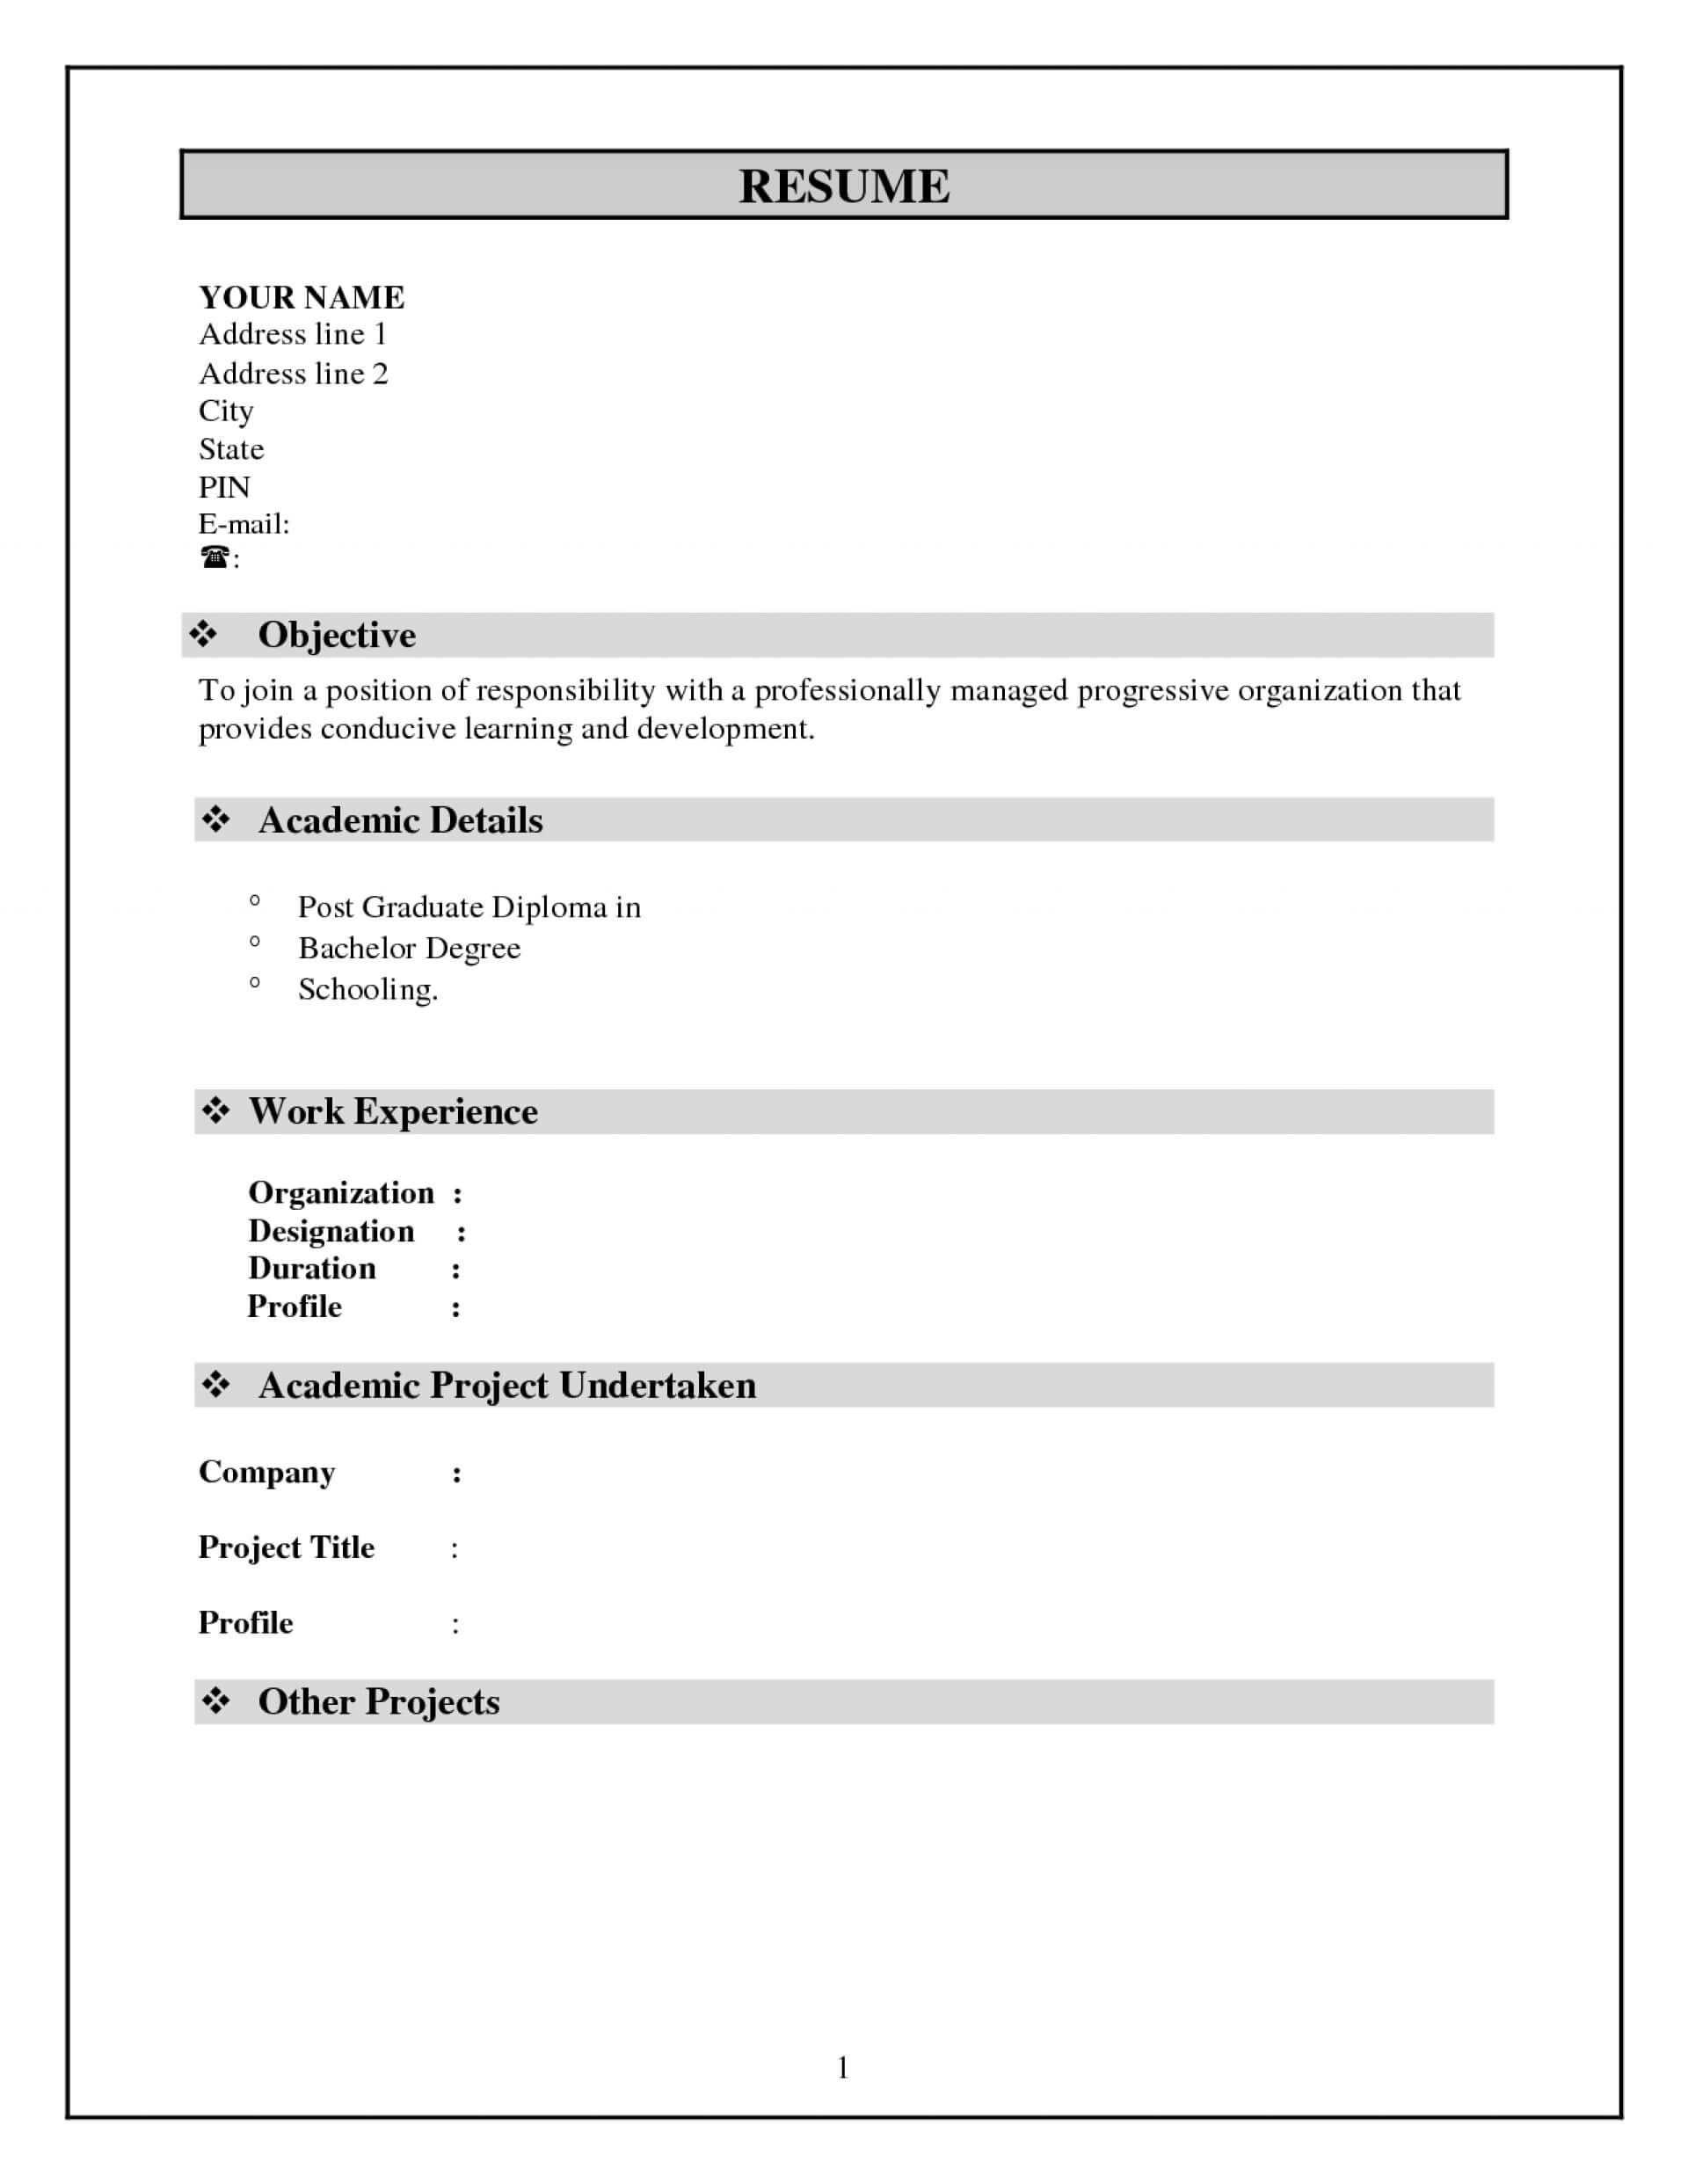 027 Microsoft Cv Resume Template Ideas Simple For Students Intended For Simple Resume Template Microsoft Word